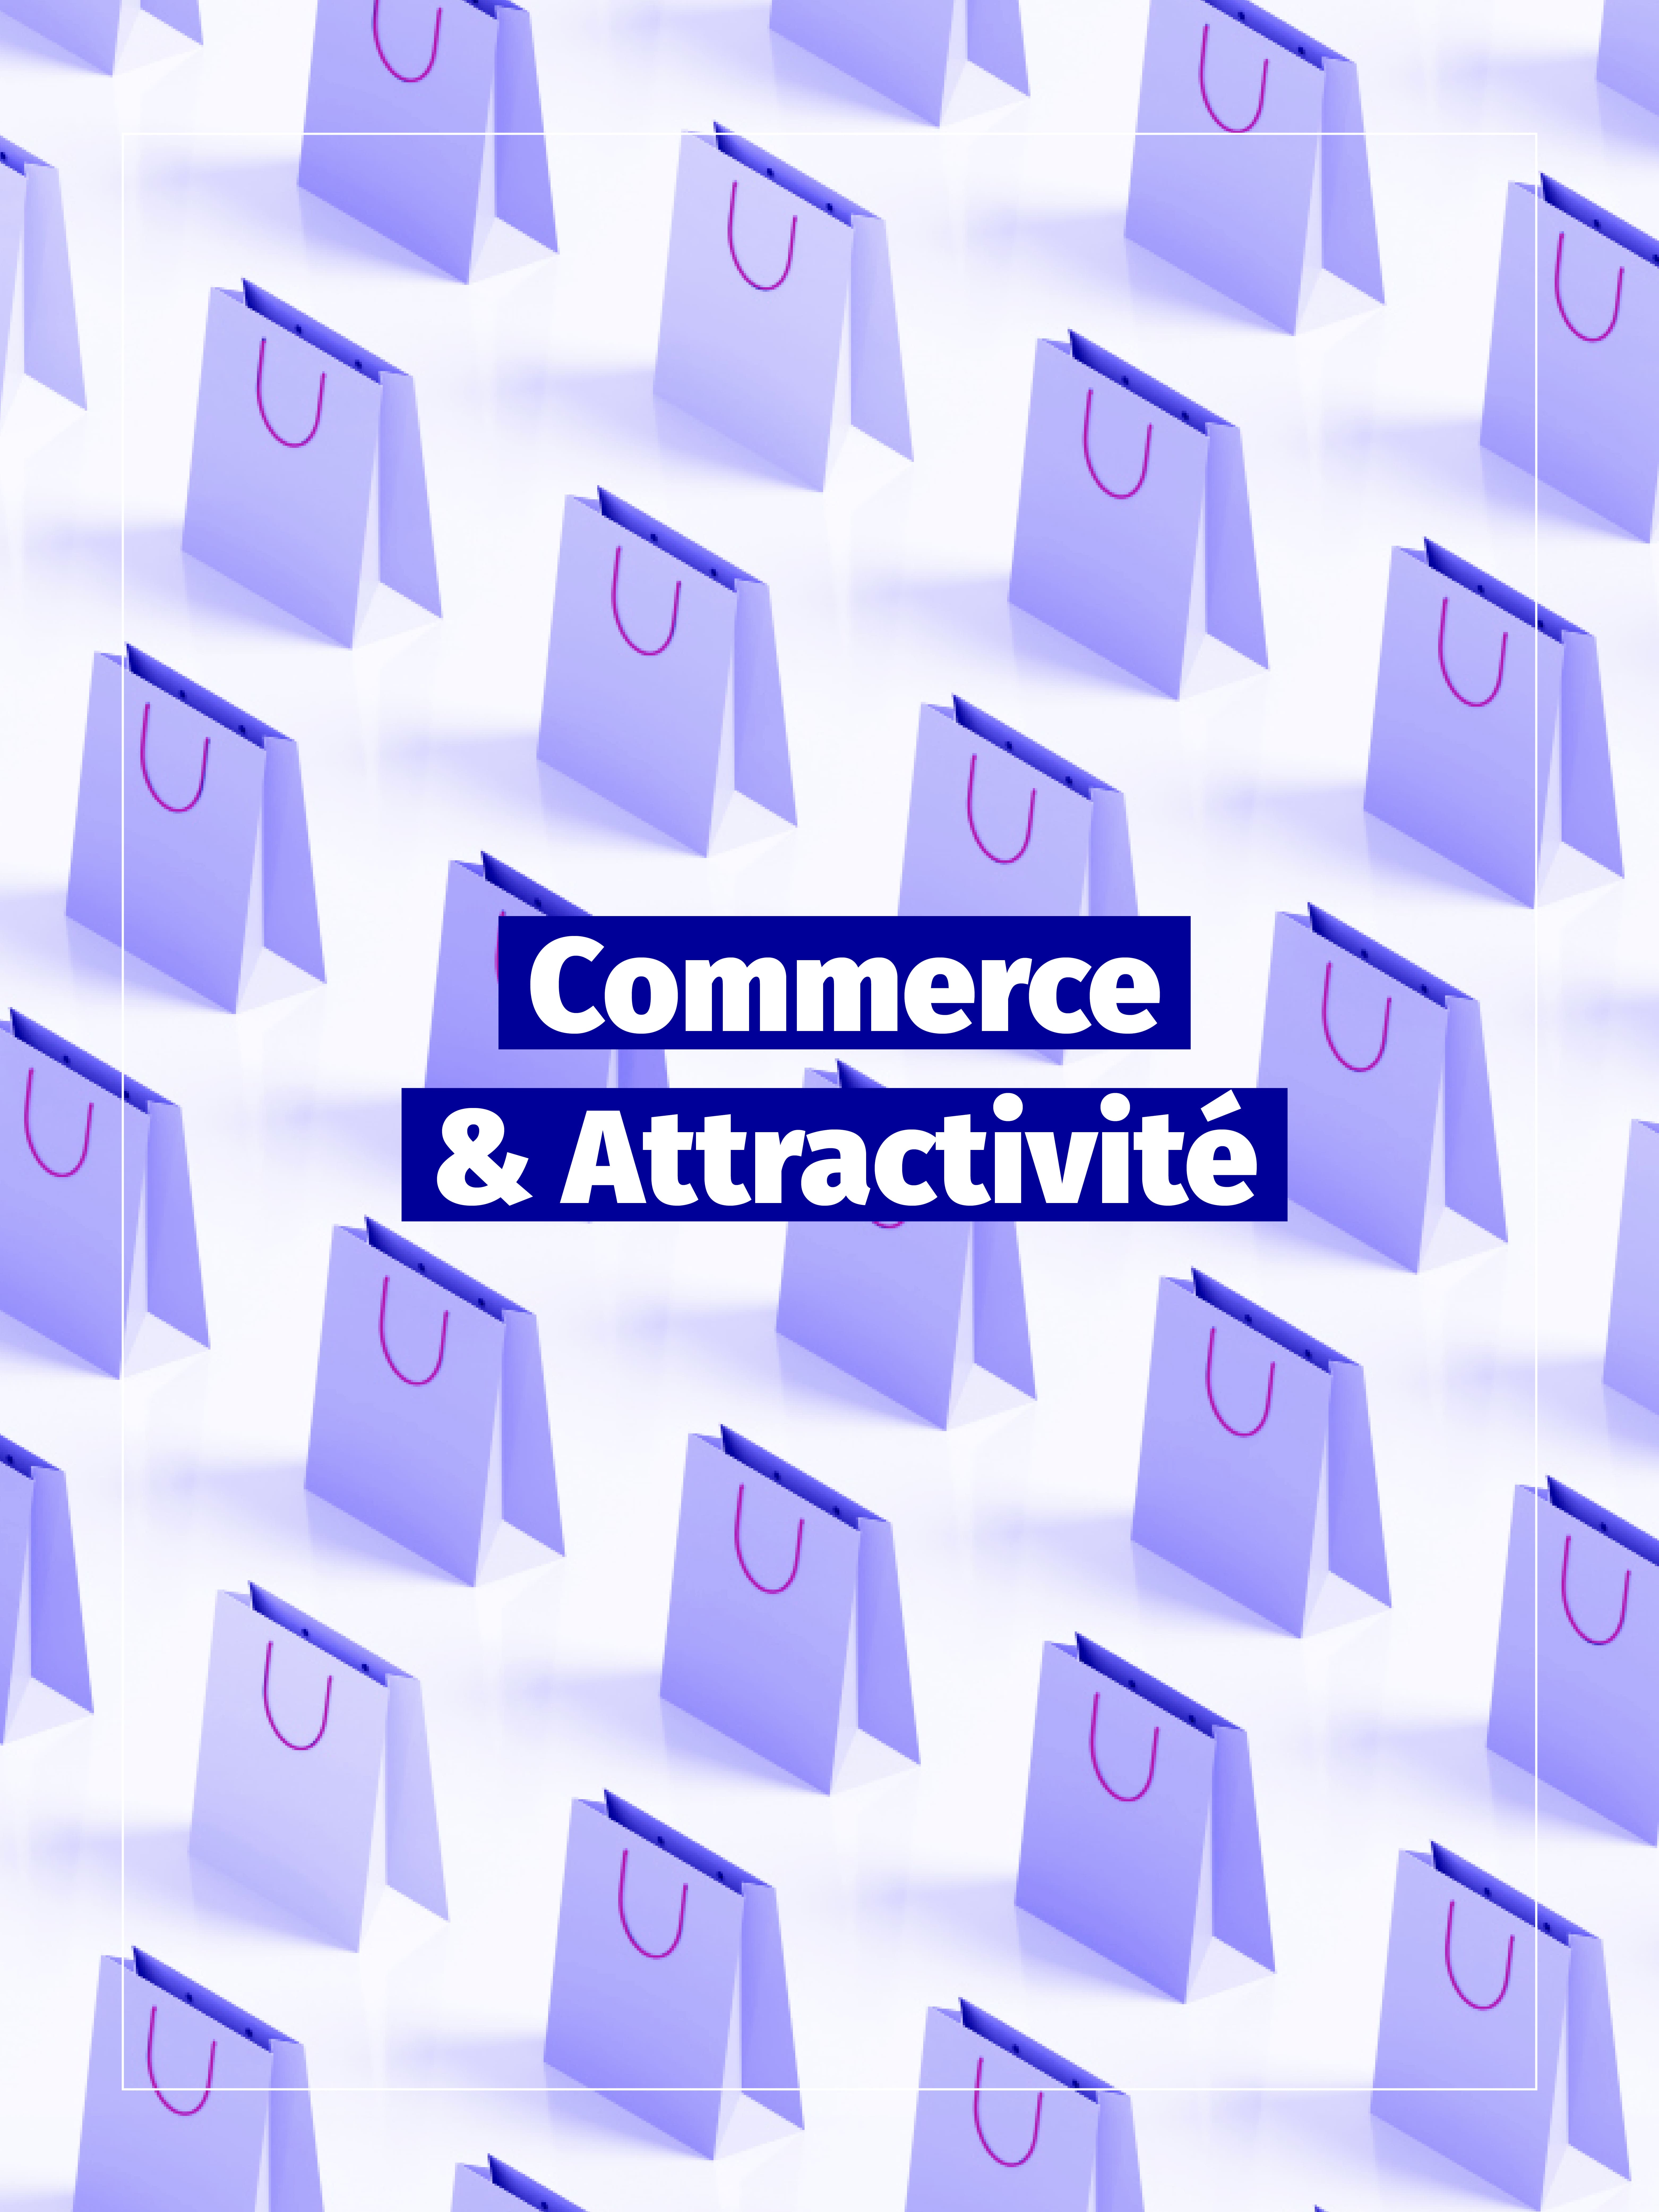 conseil accompagnement commerce attractivite